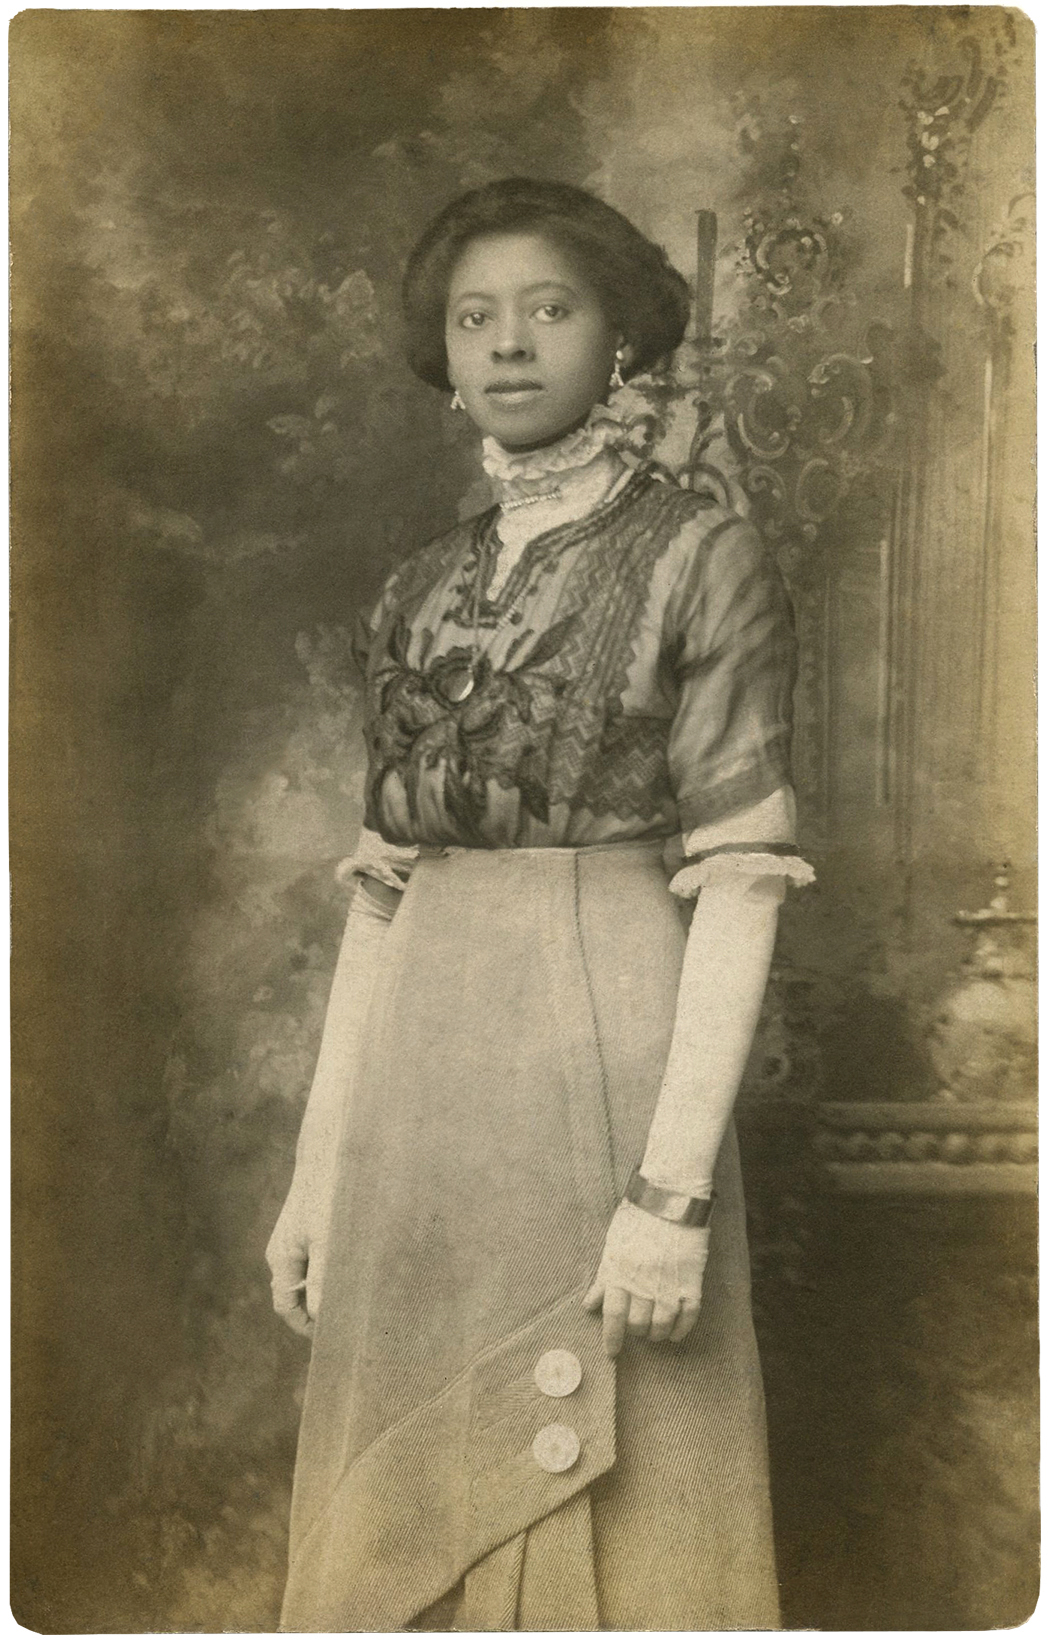 1910s photo of woman